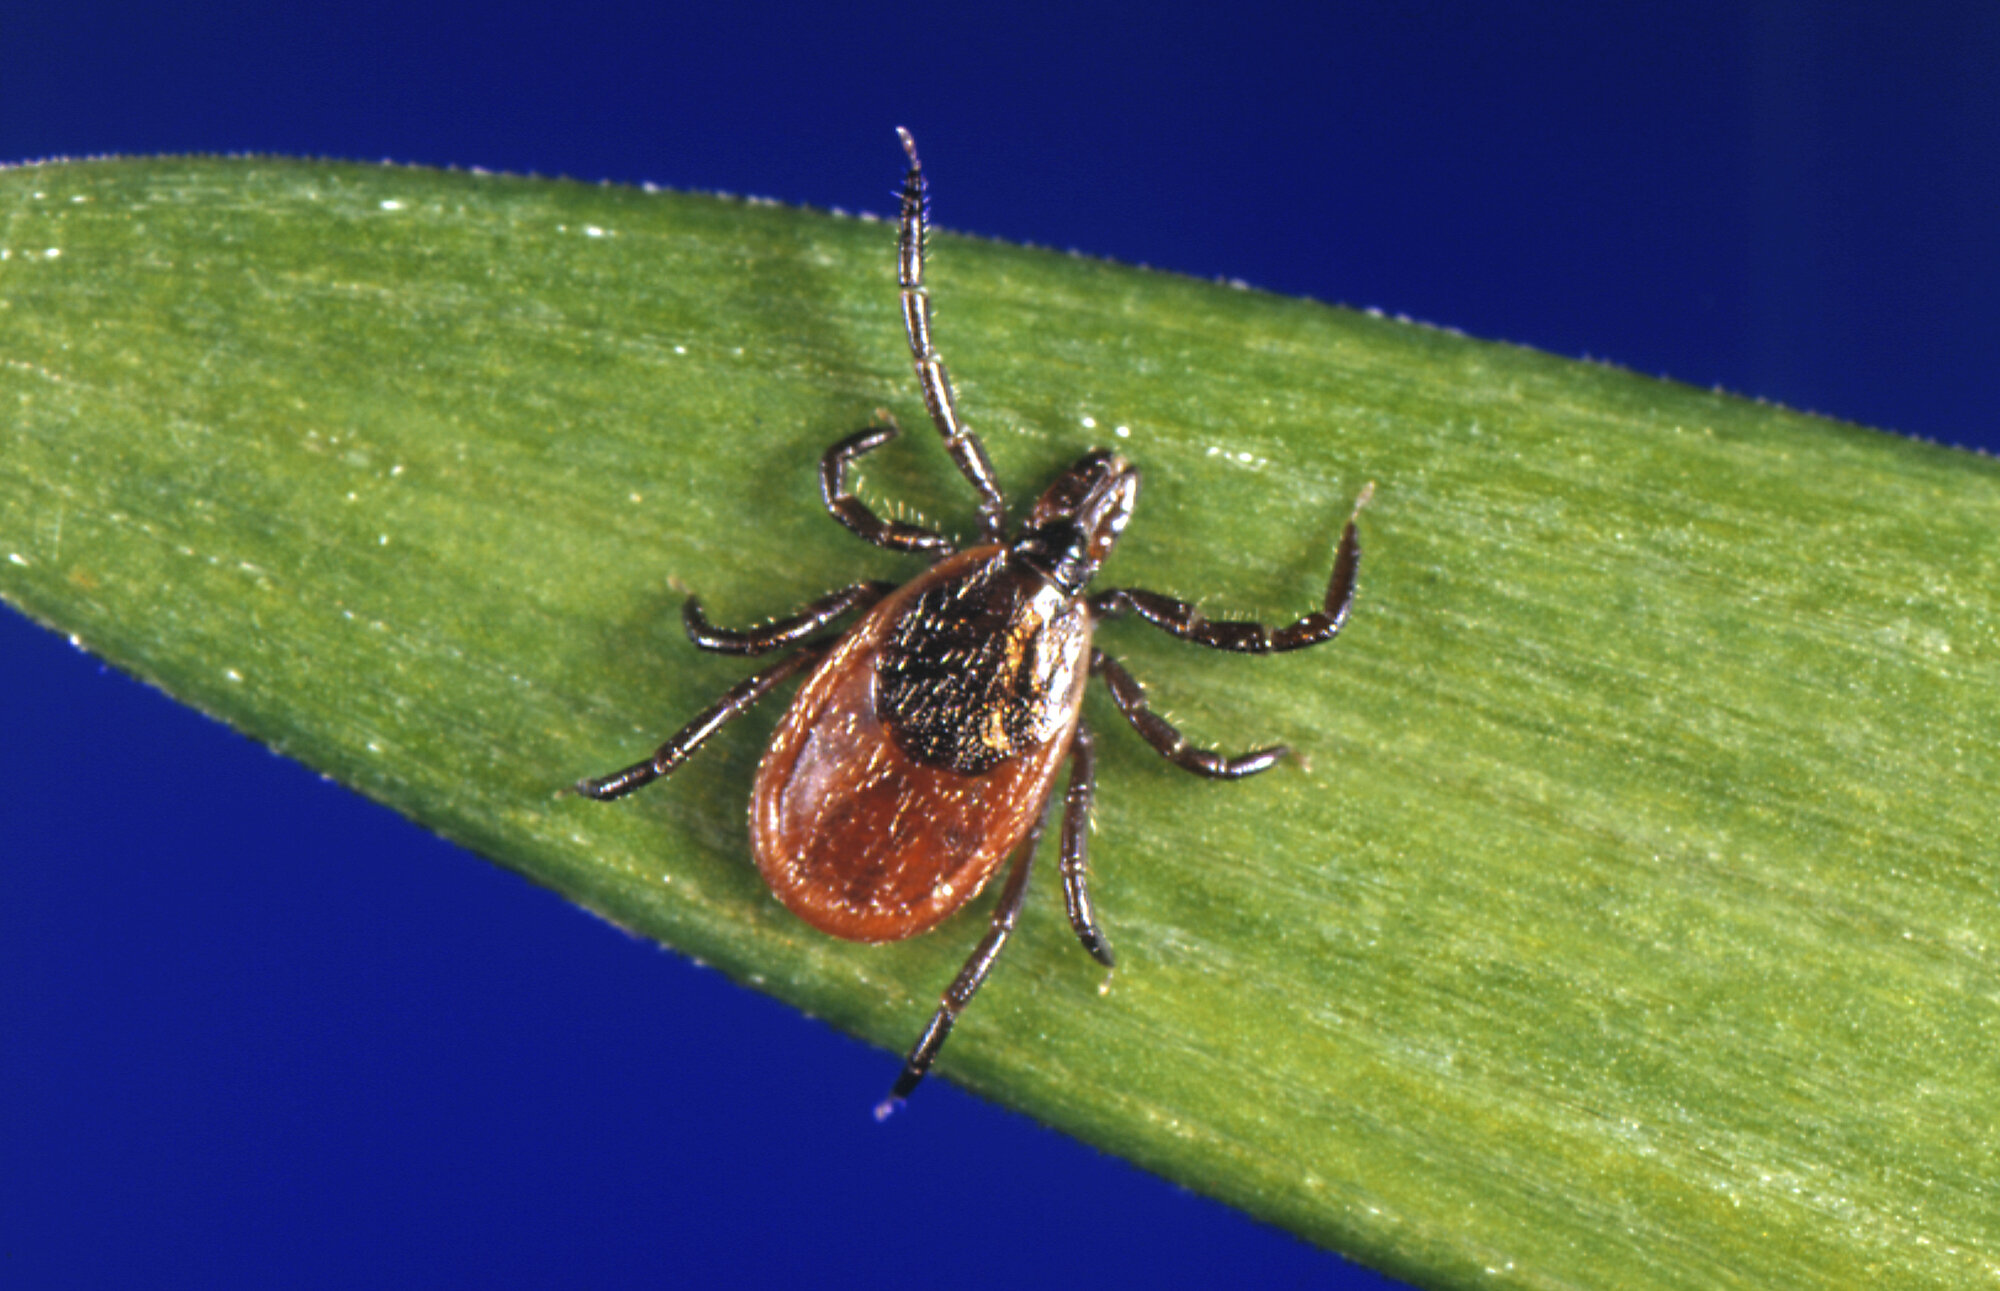 What to know about tick, Lyme season following a mild winter